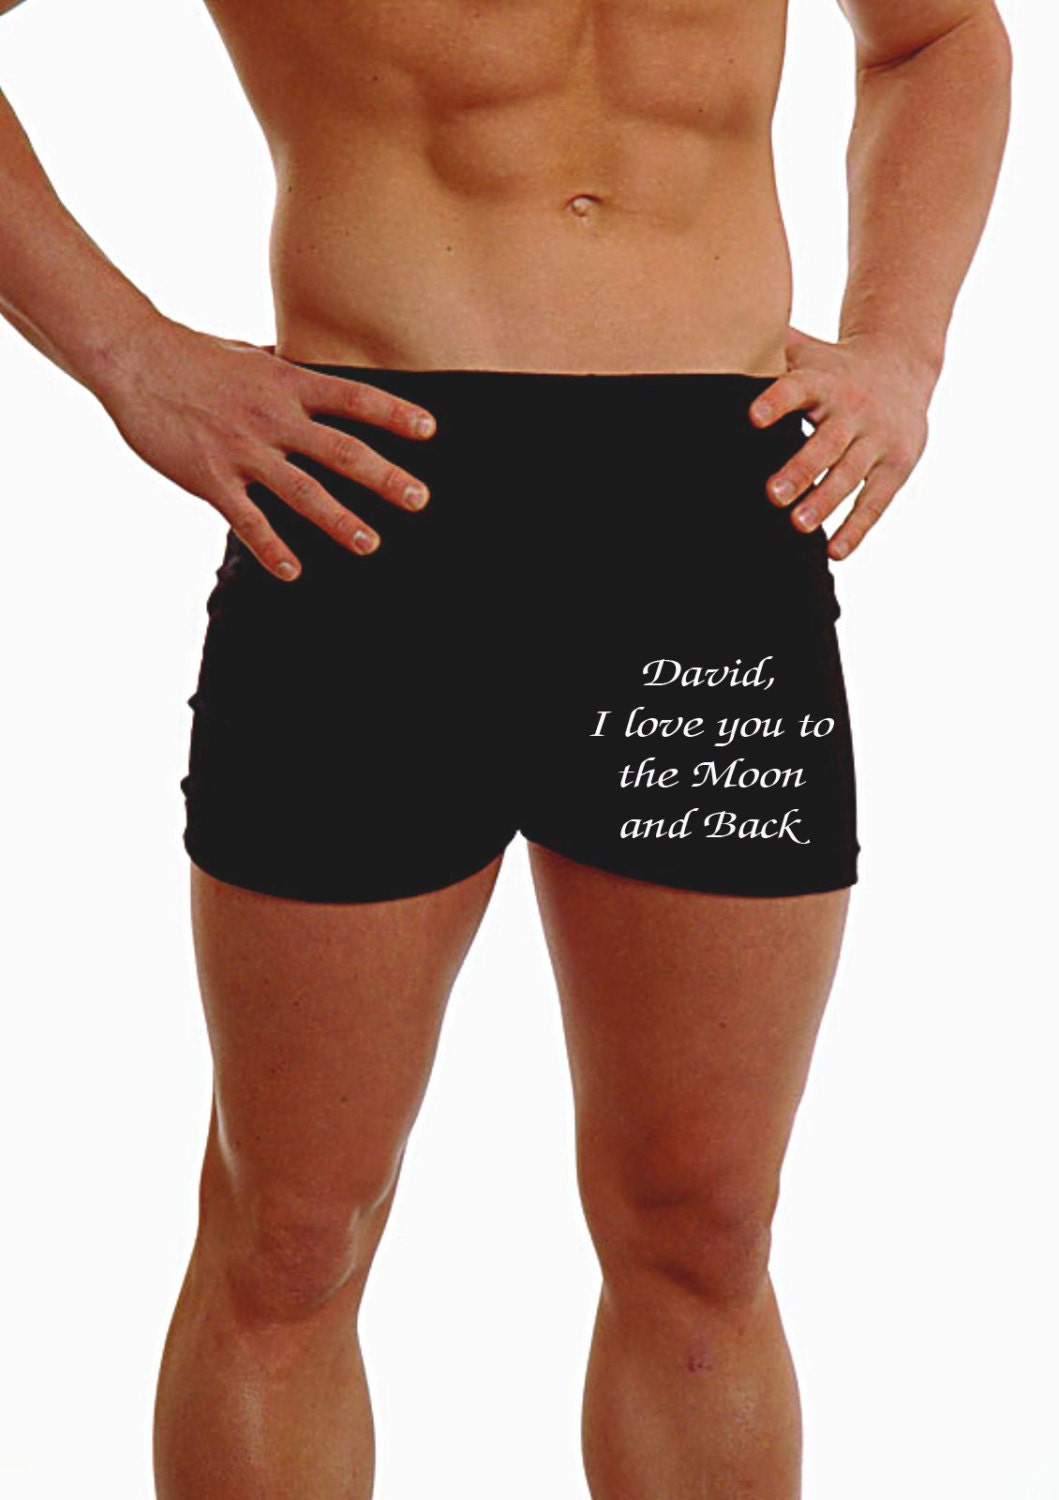 Personalised Valentines Underwear Boxer Shorts Gift for Boyfriend  Embroidered Message Heart Motif Any Message Perfect All Occasions MT Leg -   Denmark